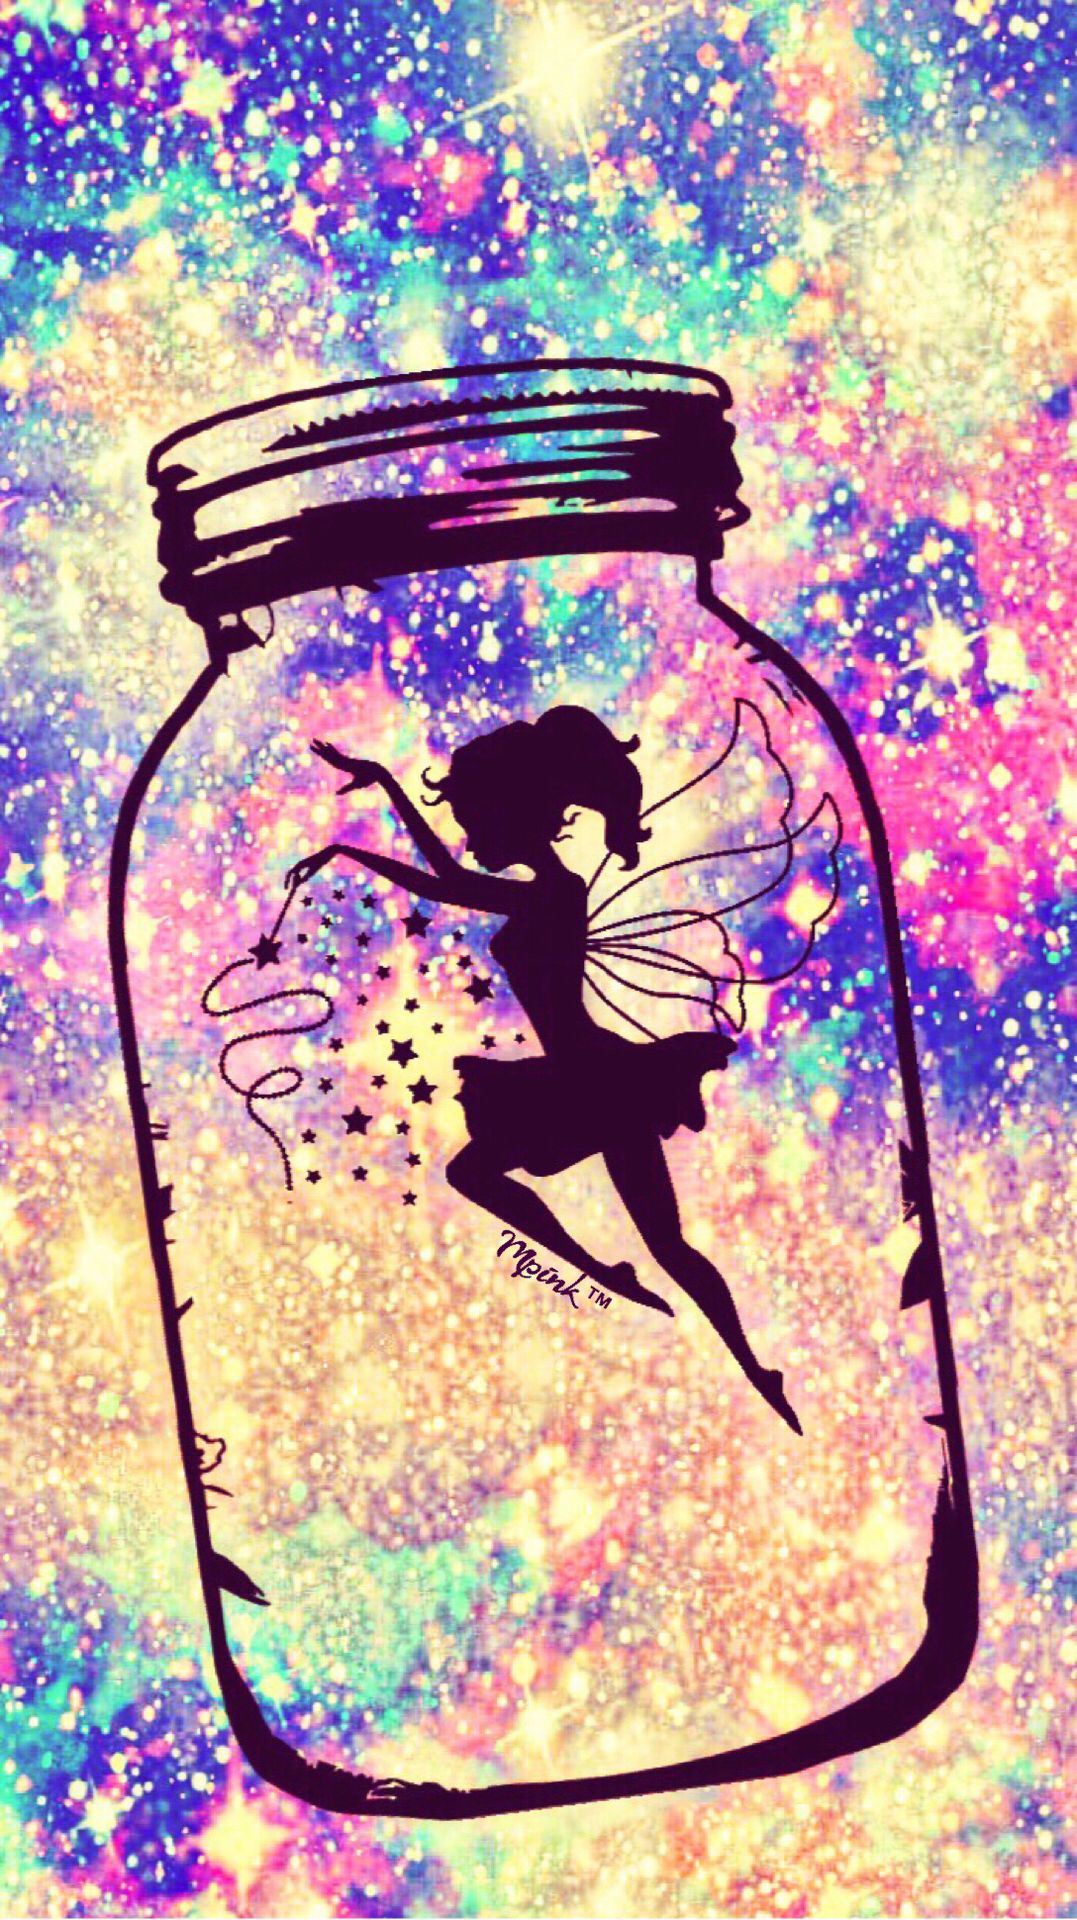 Girly Fairy Background - 1077x1920 Wallpaper 